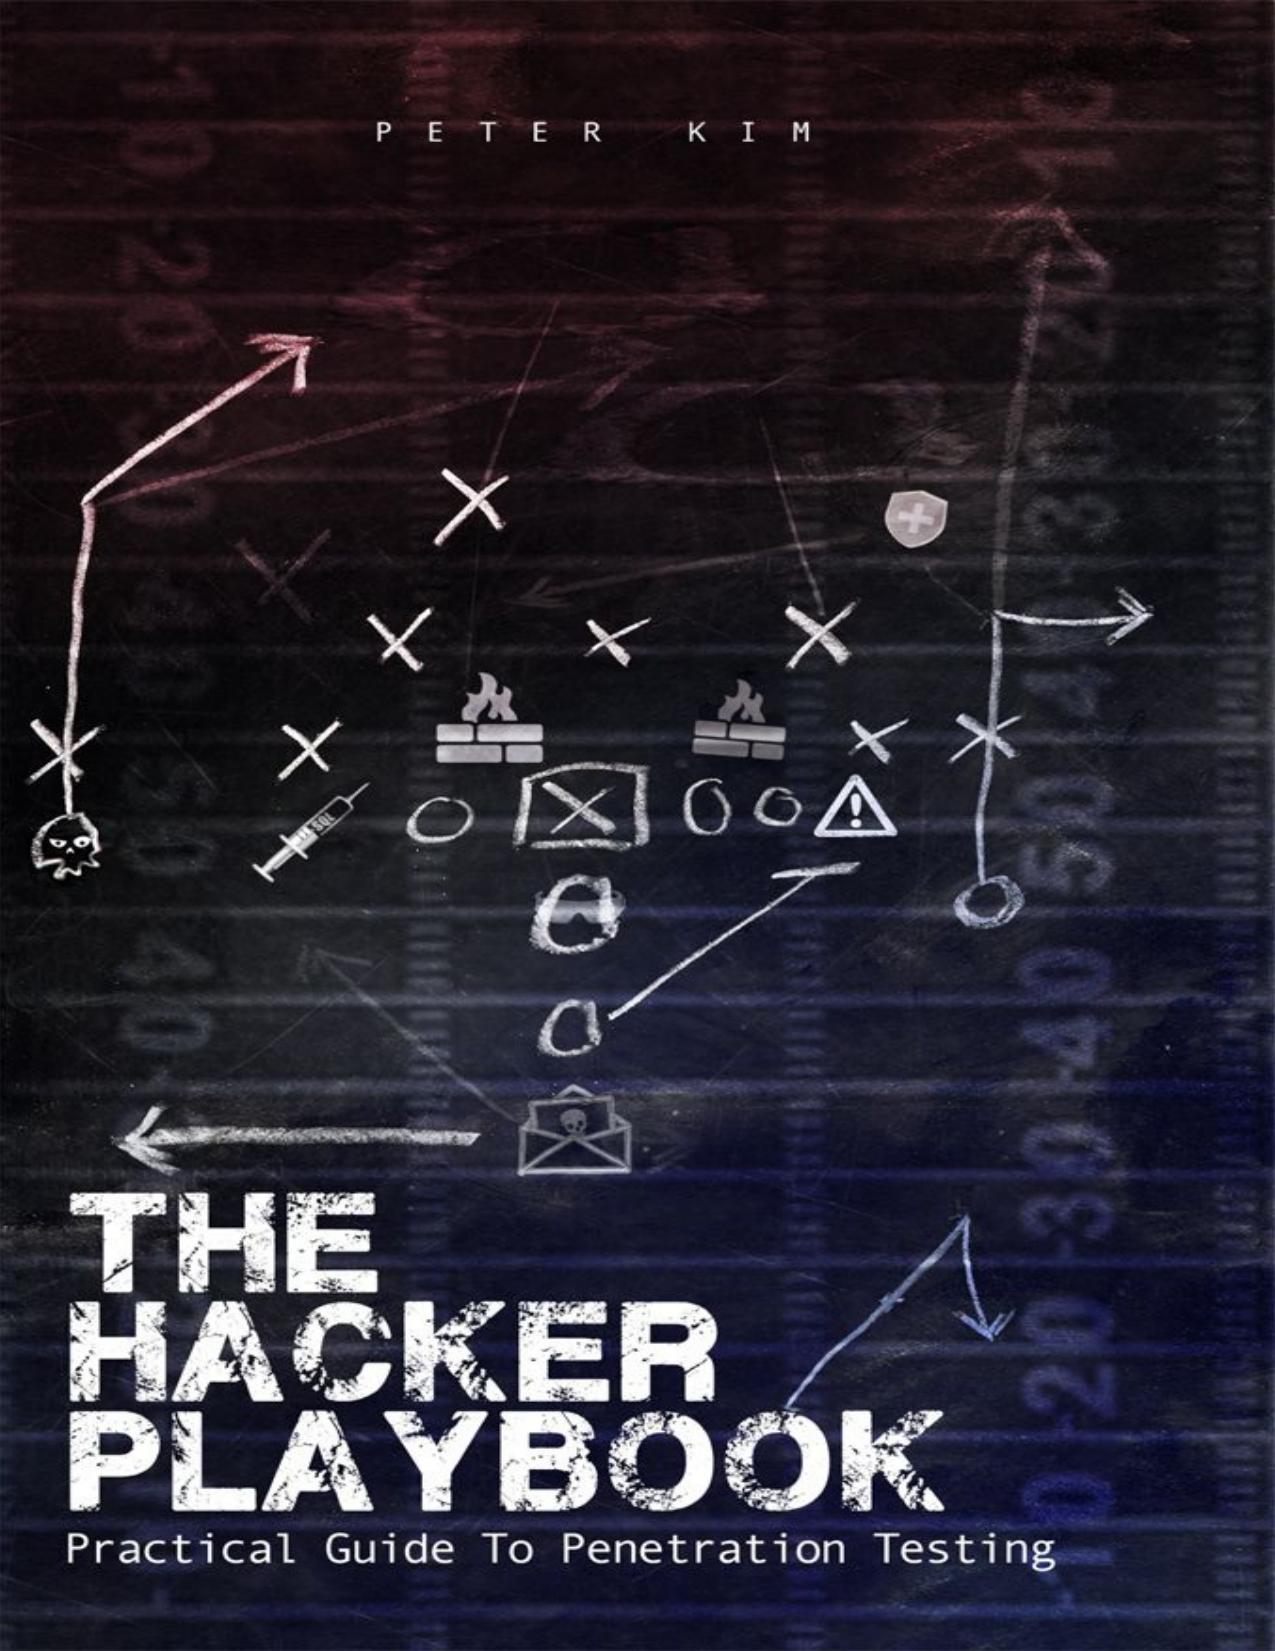 The Hacker Playbook: Practical Guide To Penetration Testing by Kim Peter